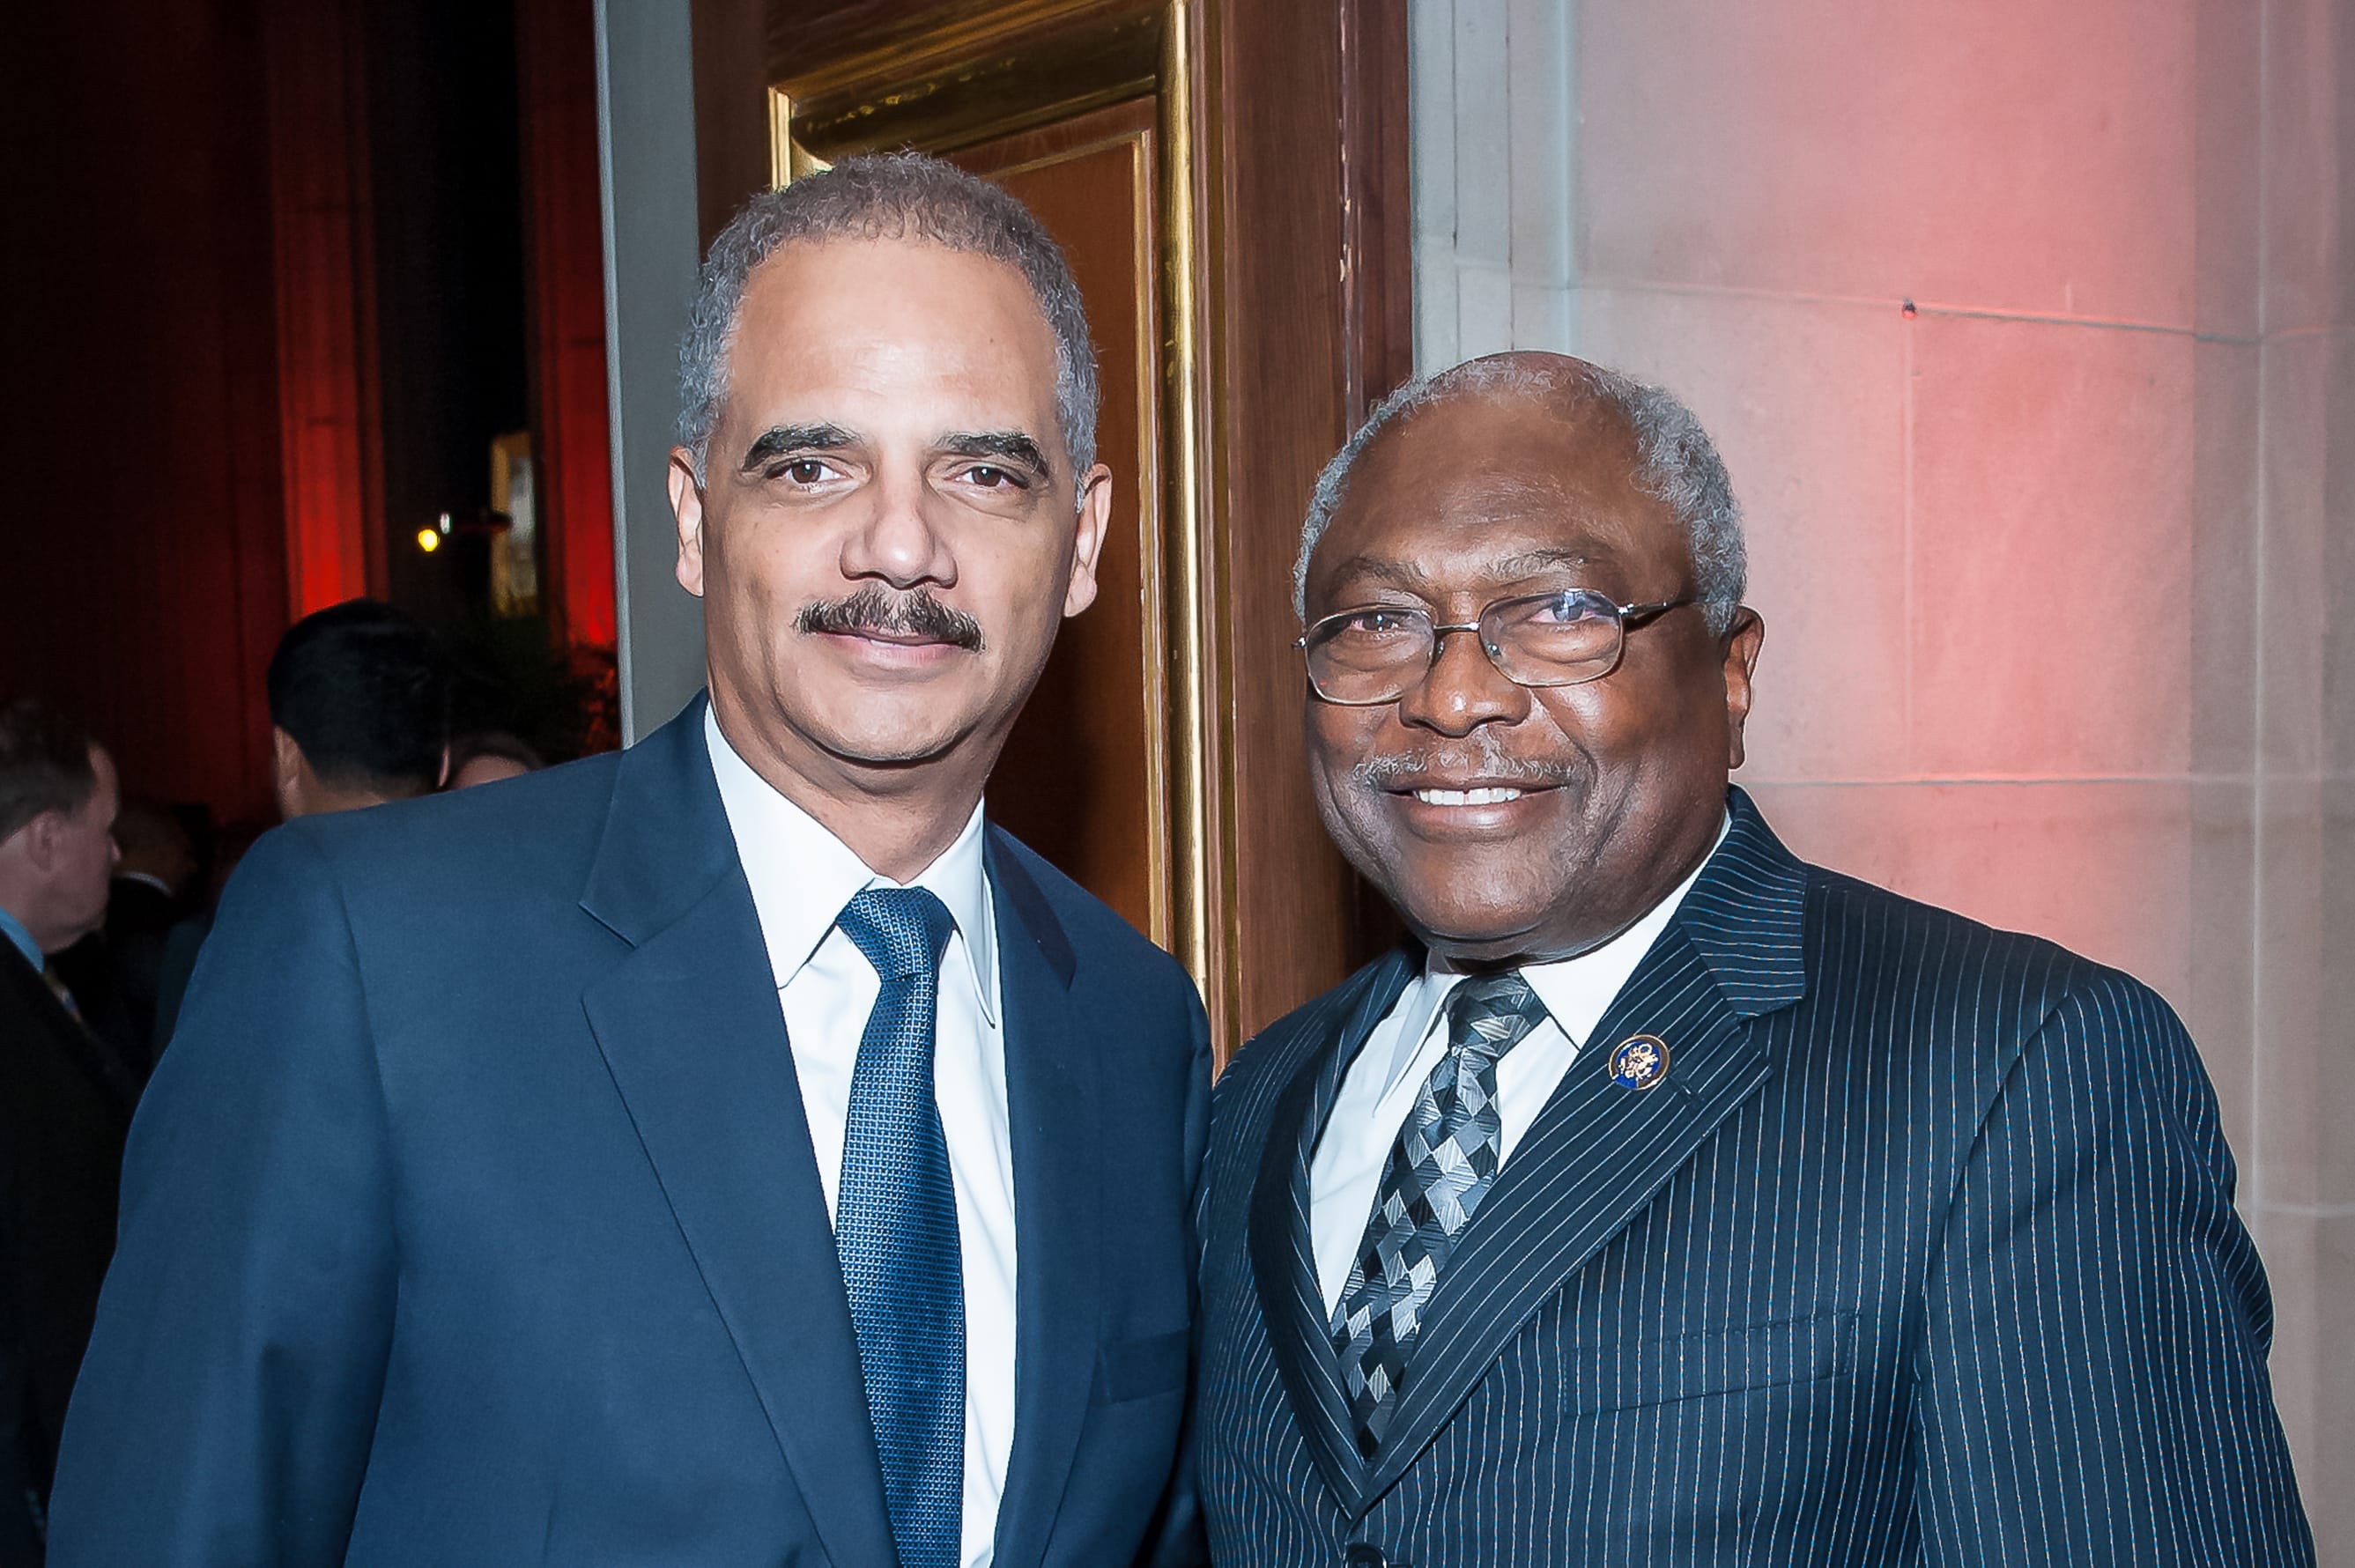 James Clyburn and Eric Holder receive the LBJ Liberty and Justice for All Award